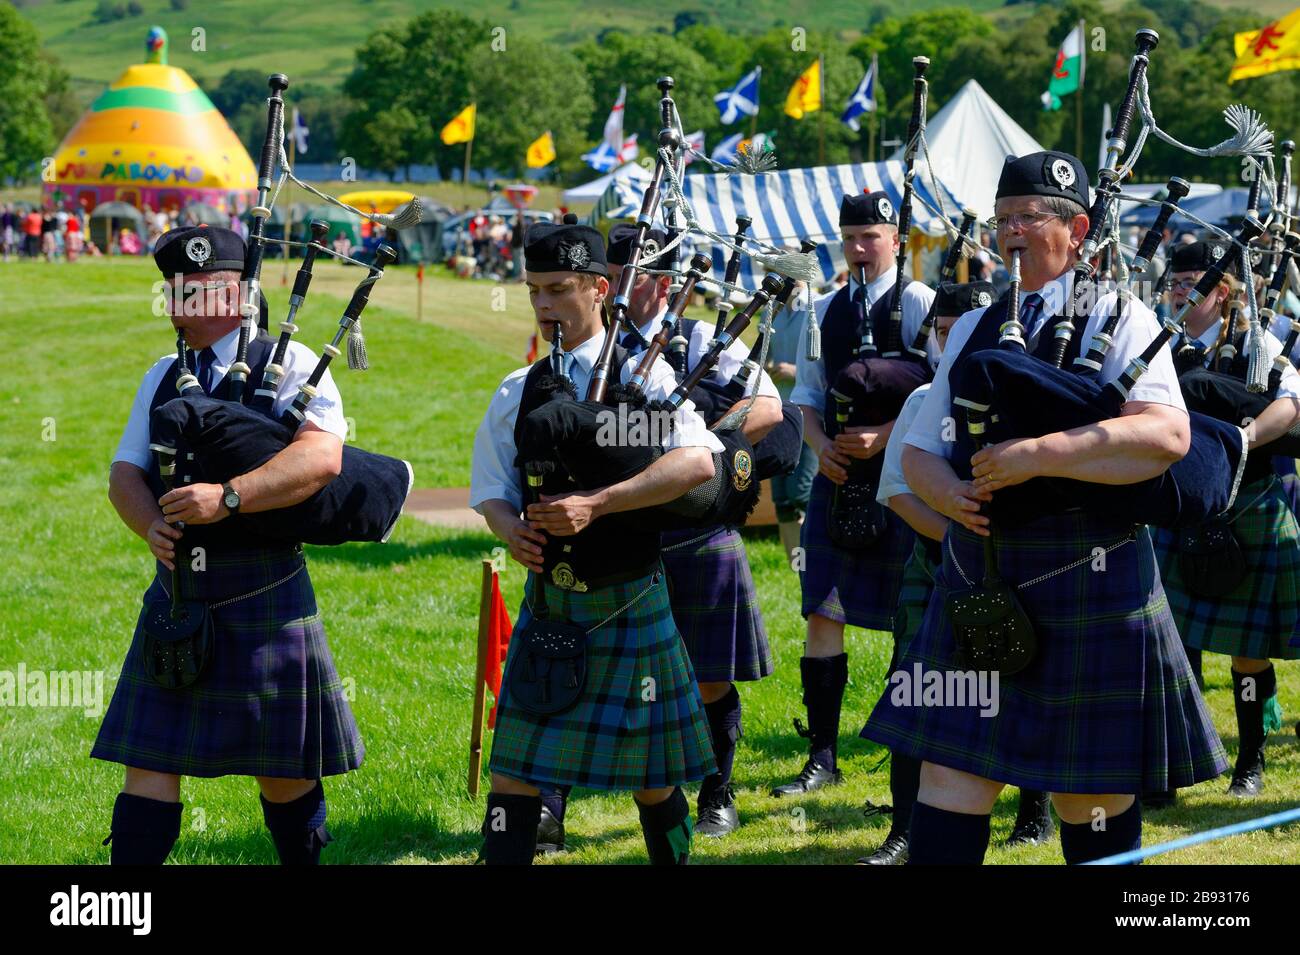 Pipers at the highland games of Lochearnhead, near Crieff, Scotland. Stock Photo